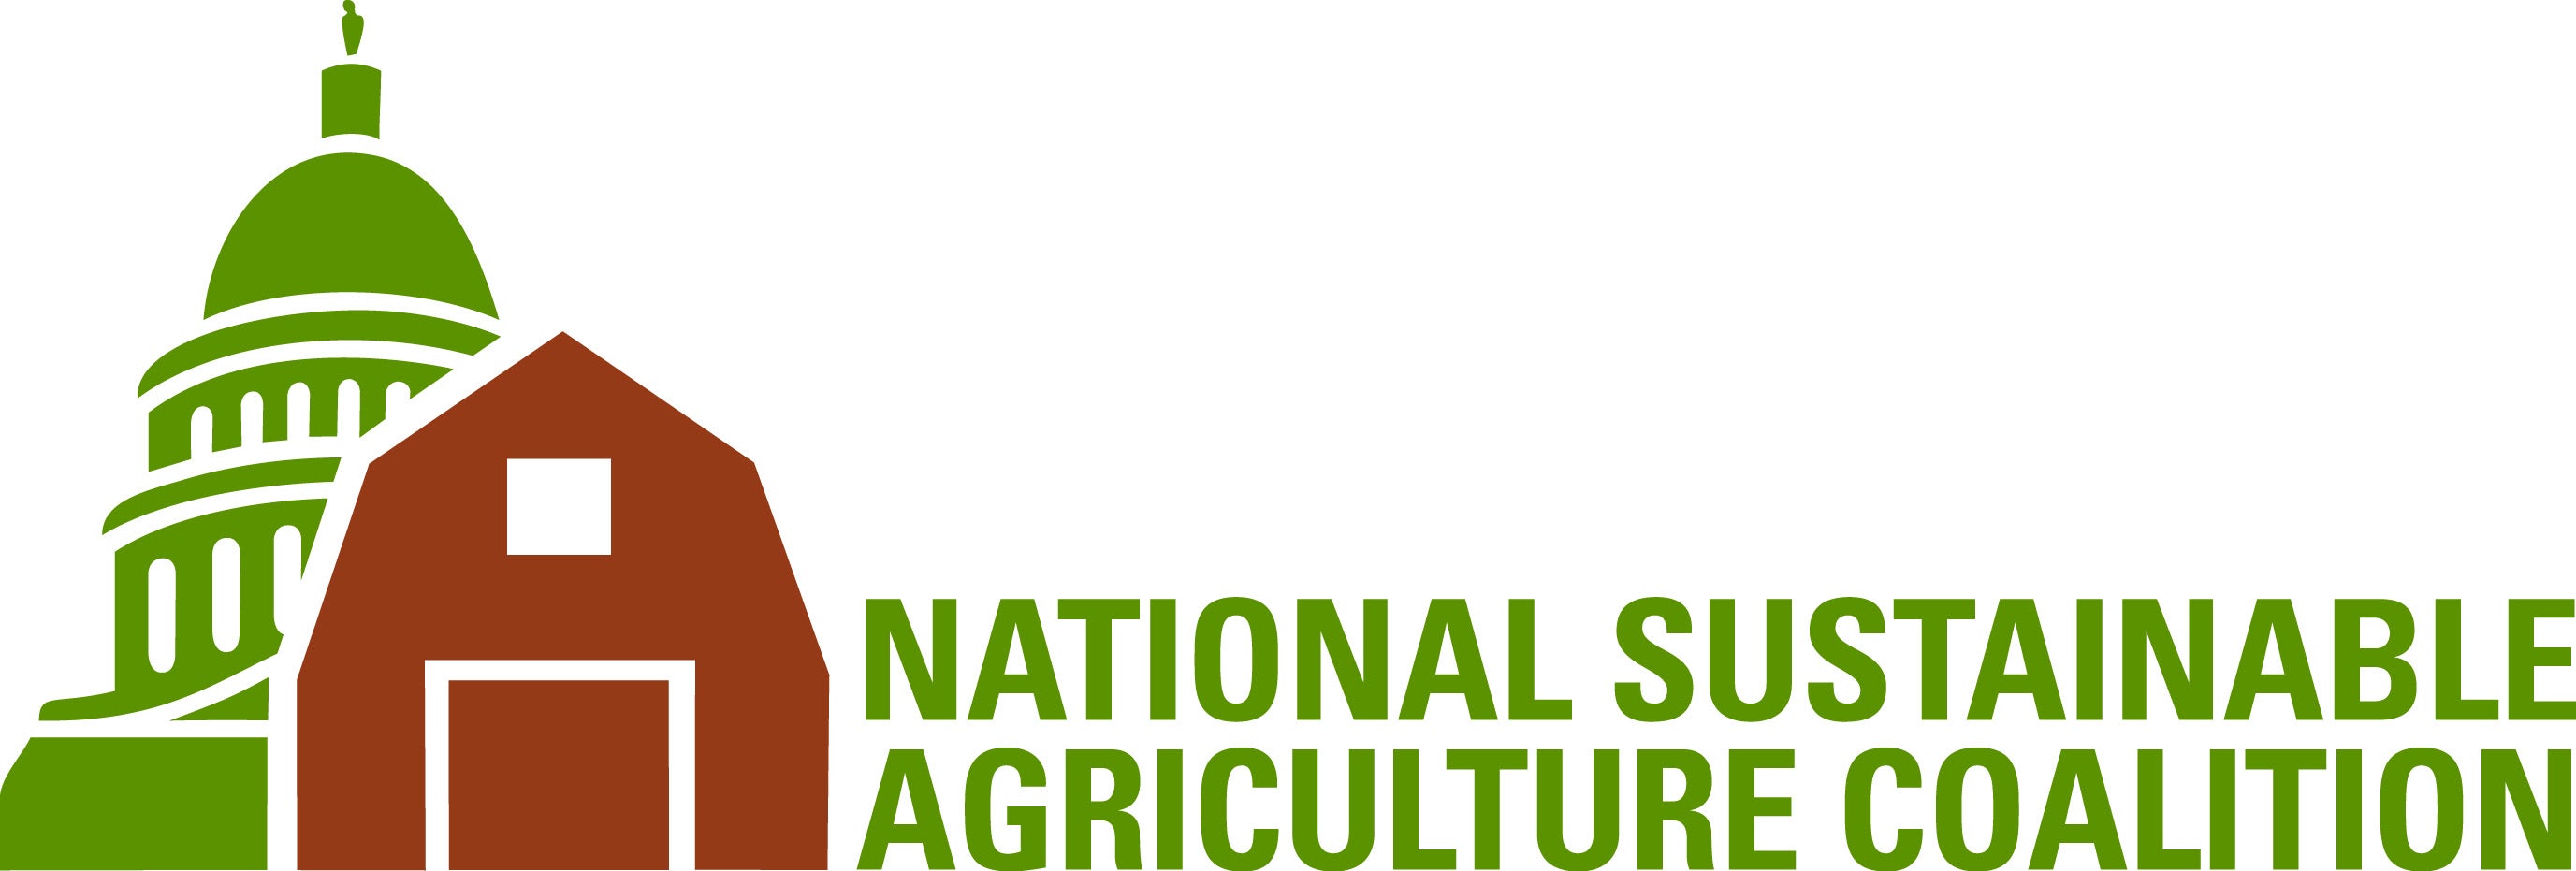 Sustainable Agriculture - Latest News